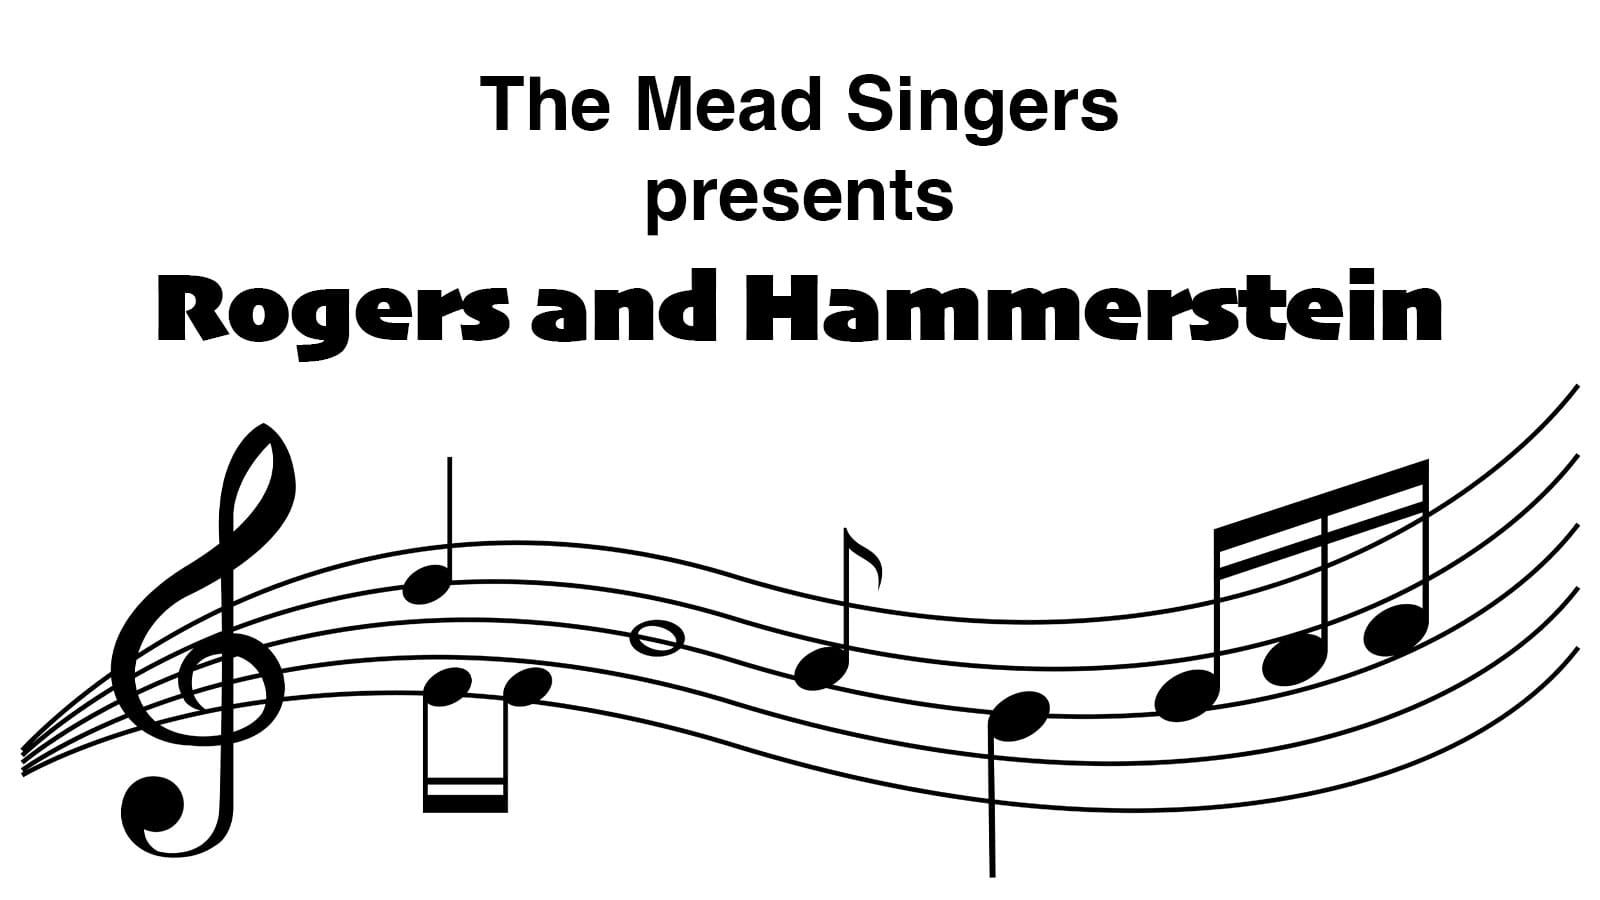 Thetford Bubbly Hub what's on and events Mead Singers Methodist Rogers and Hammerstein